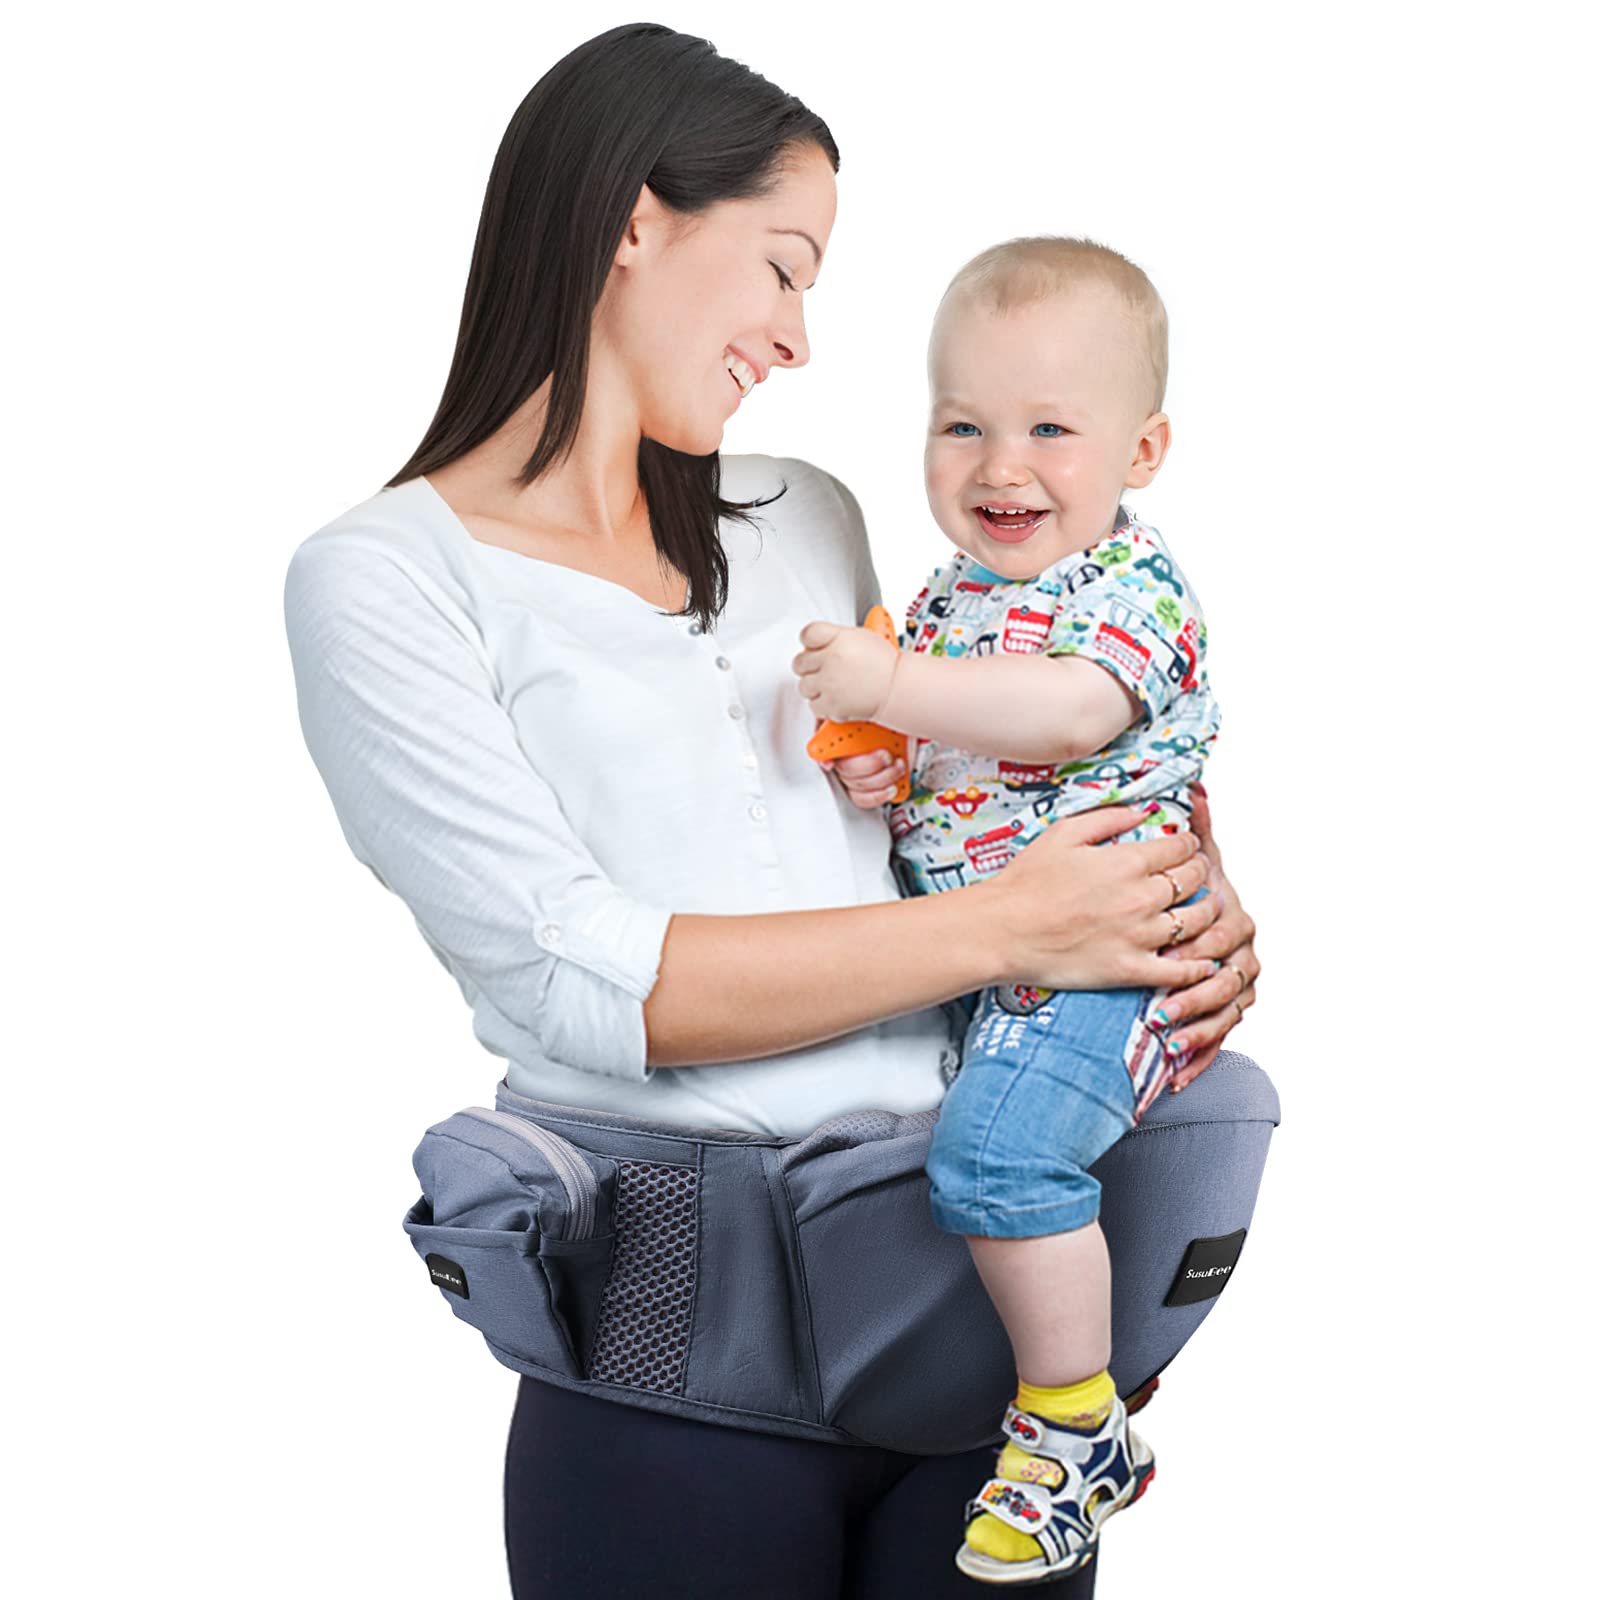 Baby Carrier, Baby Hip Carrier Non-Slip Breathable Toddler Baby Hip Seat Carrier, Baby Essentials, Baby Carrier Newborn to Toddler for Infant, Comfortable Padded & Side-Pocket